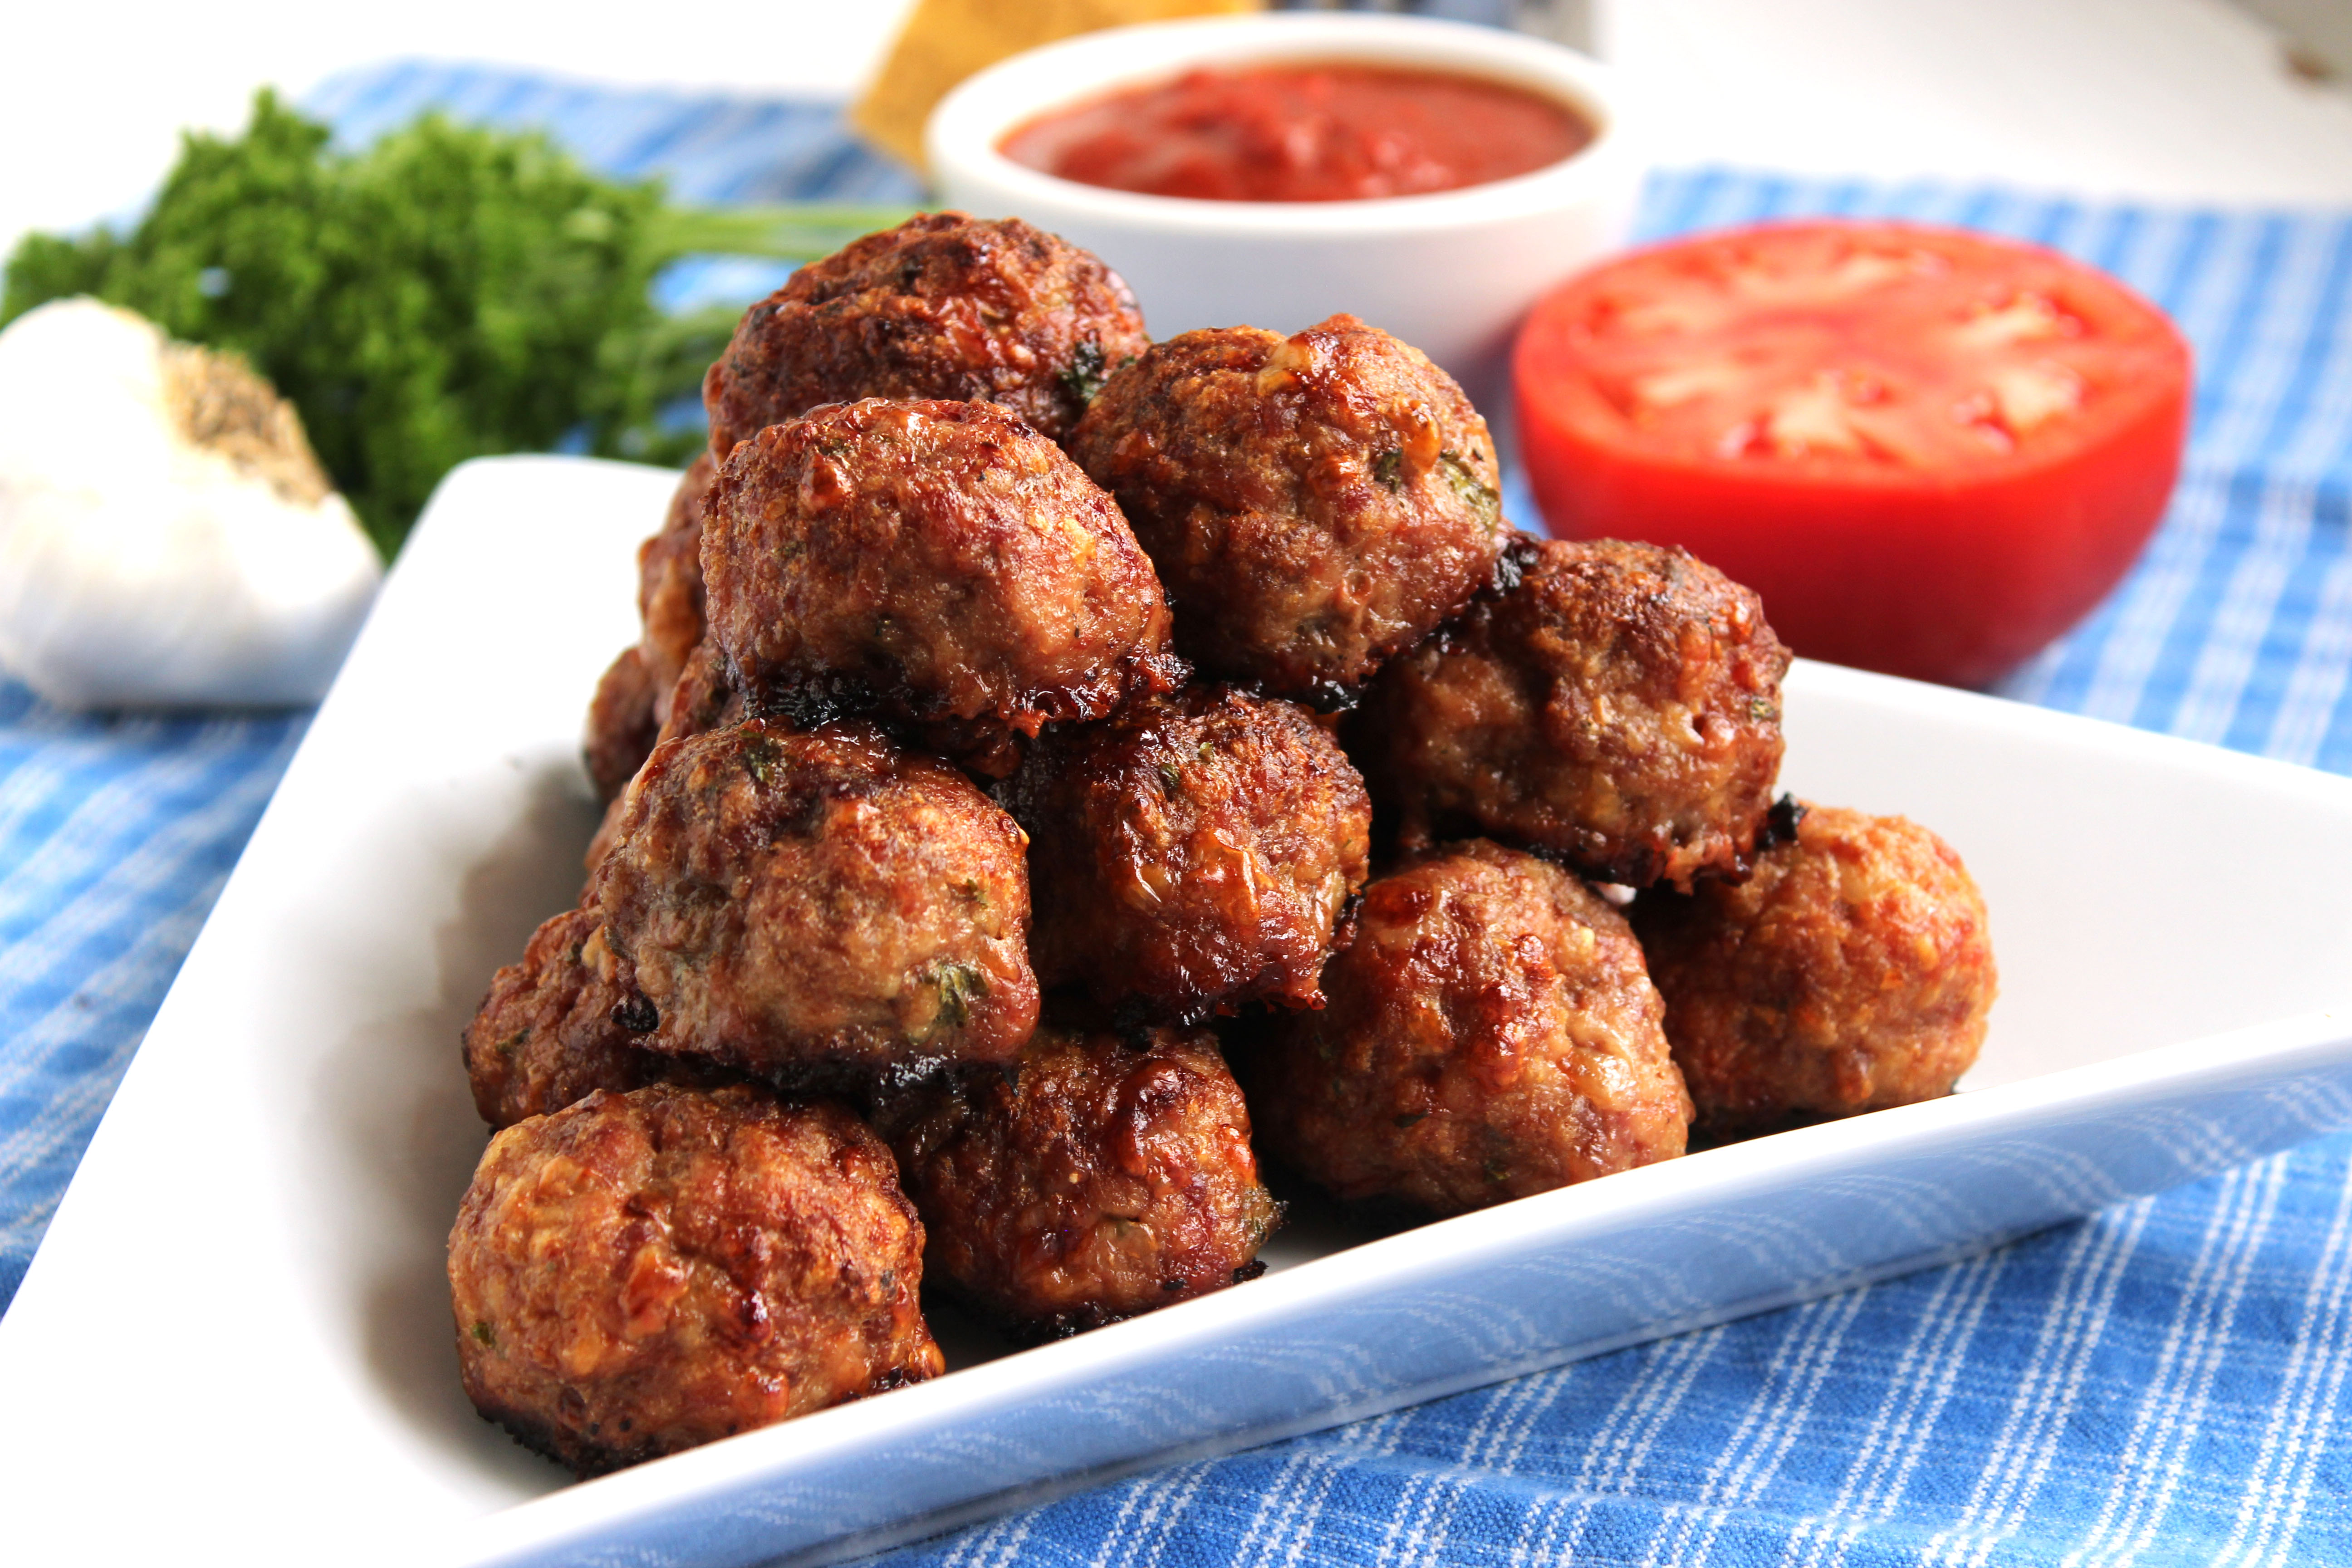 Food Meatball HD Wallpaper Background Image.